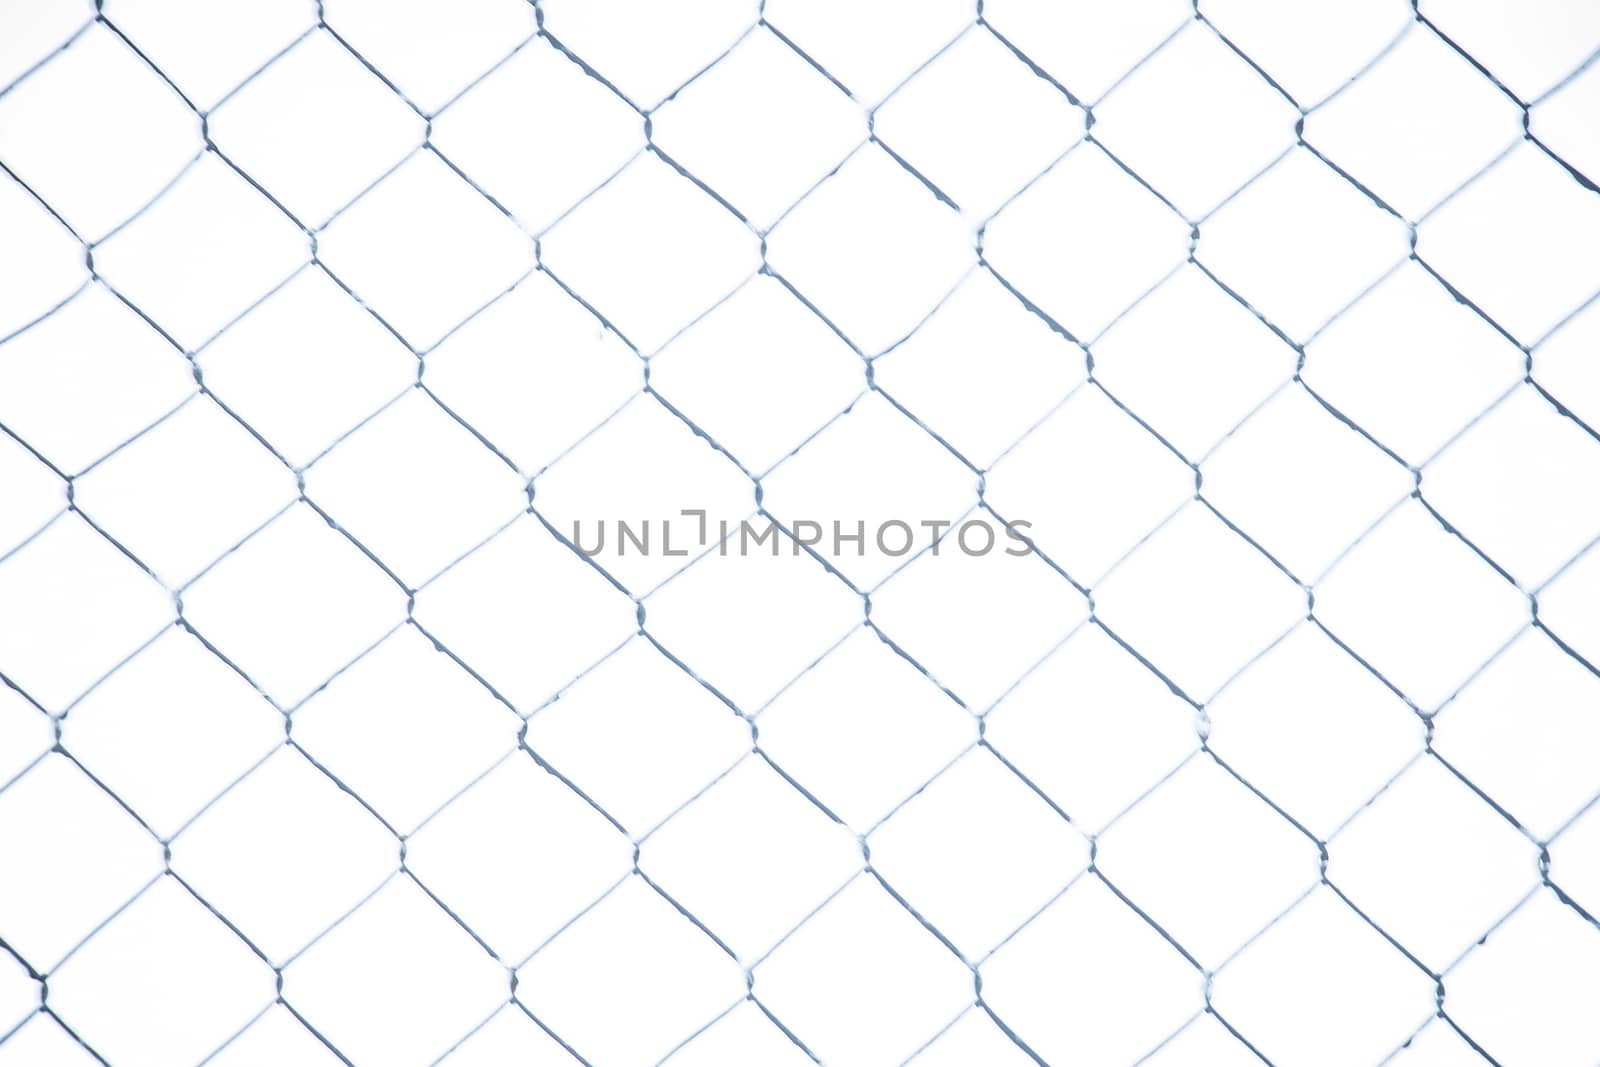 Wire fence in the snow. Fence background. Metallic net with snow. Metal net in winter covered with snow. Wire fence closeup. Steel wire mesh fence vintage effect